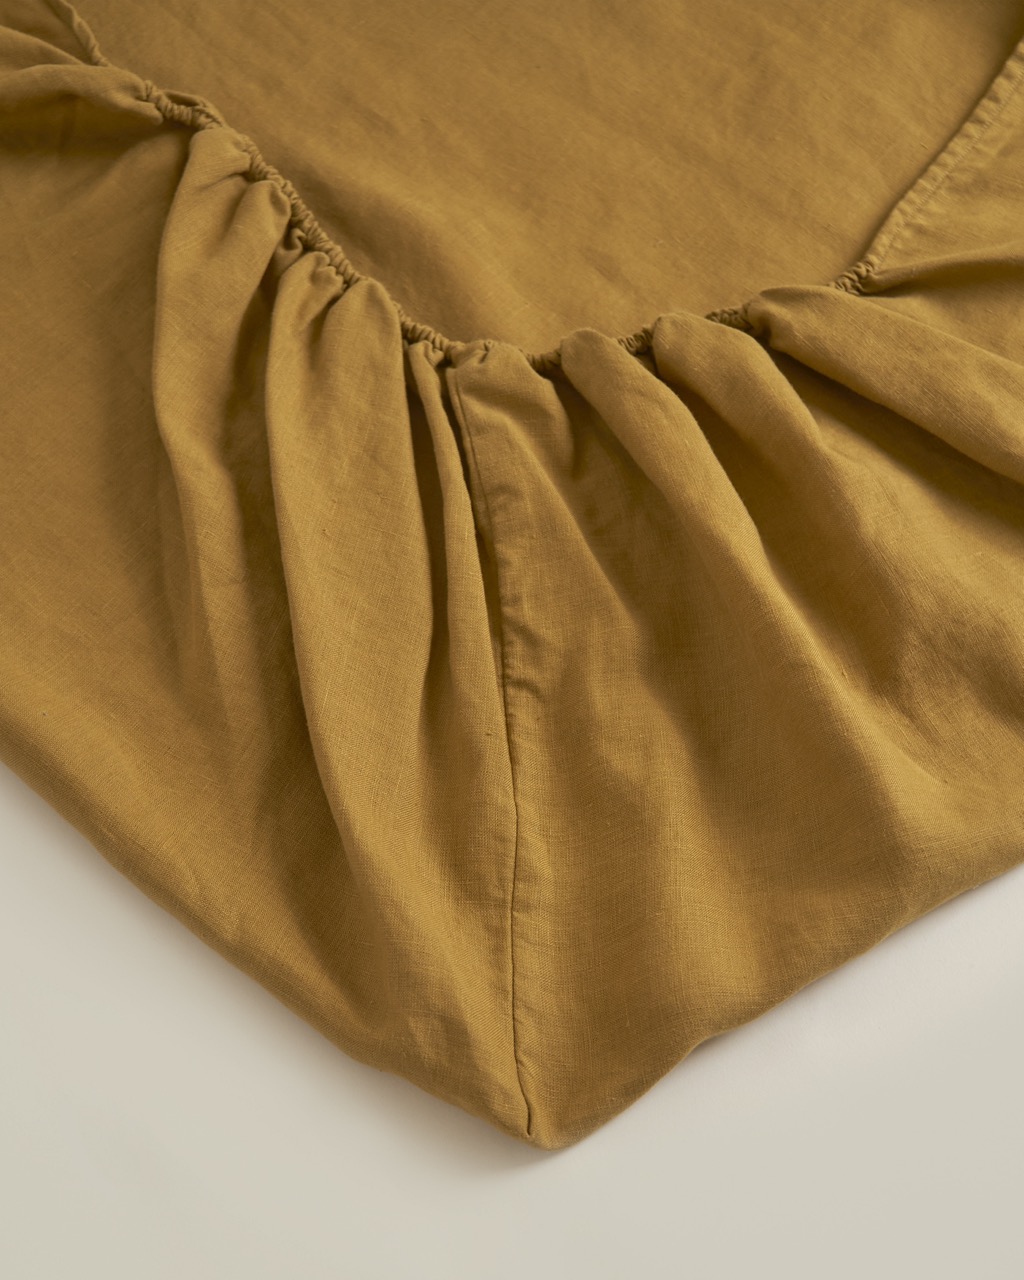 FITTED SHEET CARAMEL